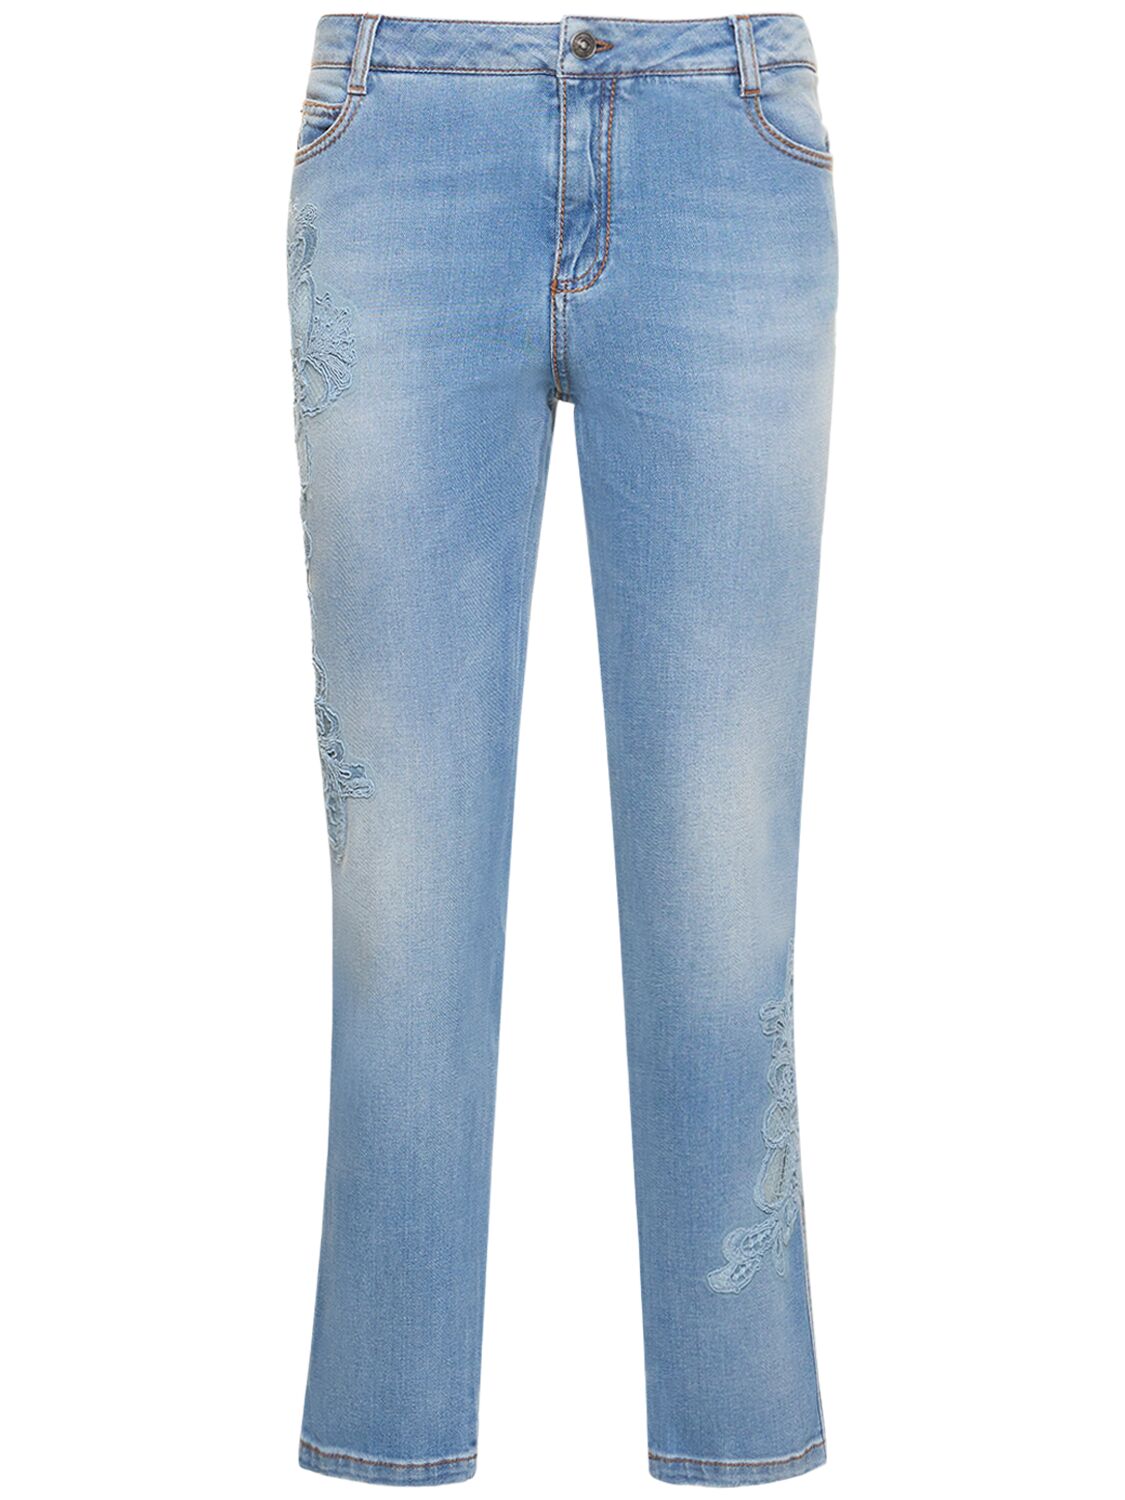 Ermanno Scervino Denim Mid Rise Skinny Jeans W/embroidery In Blue